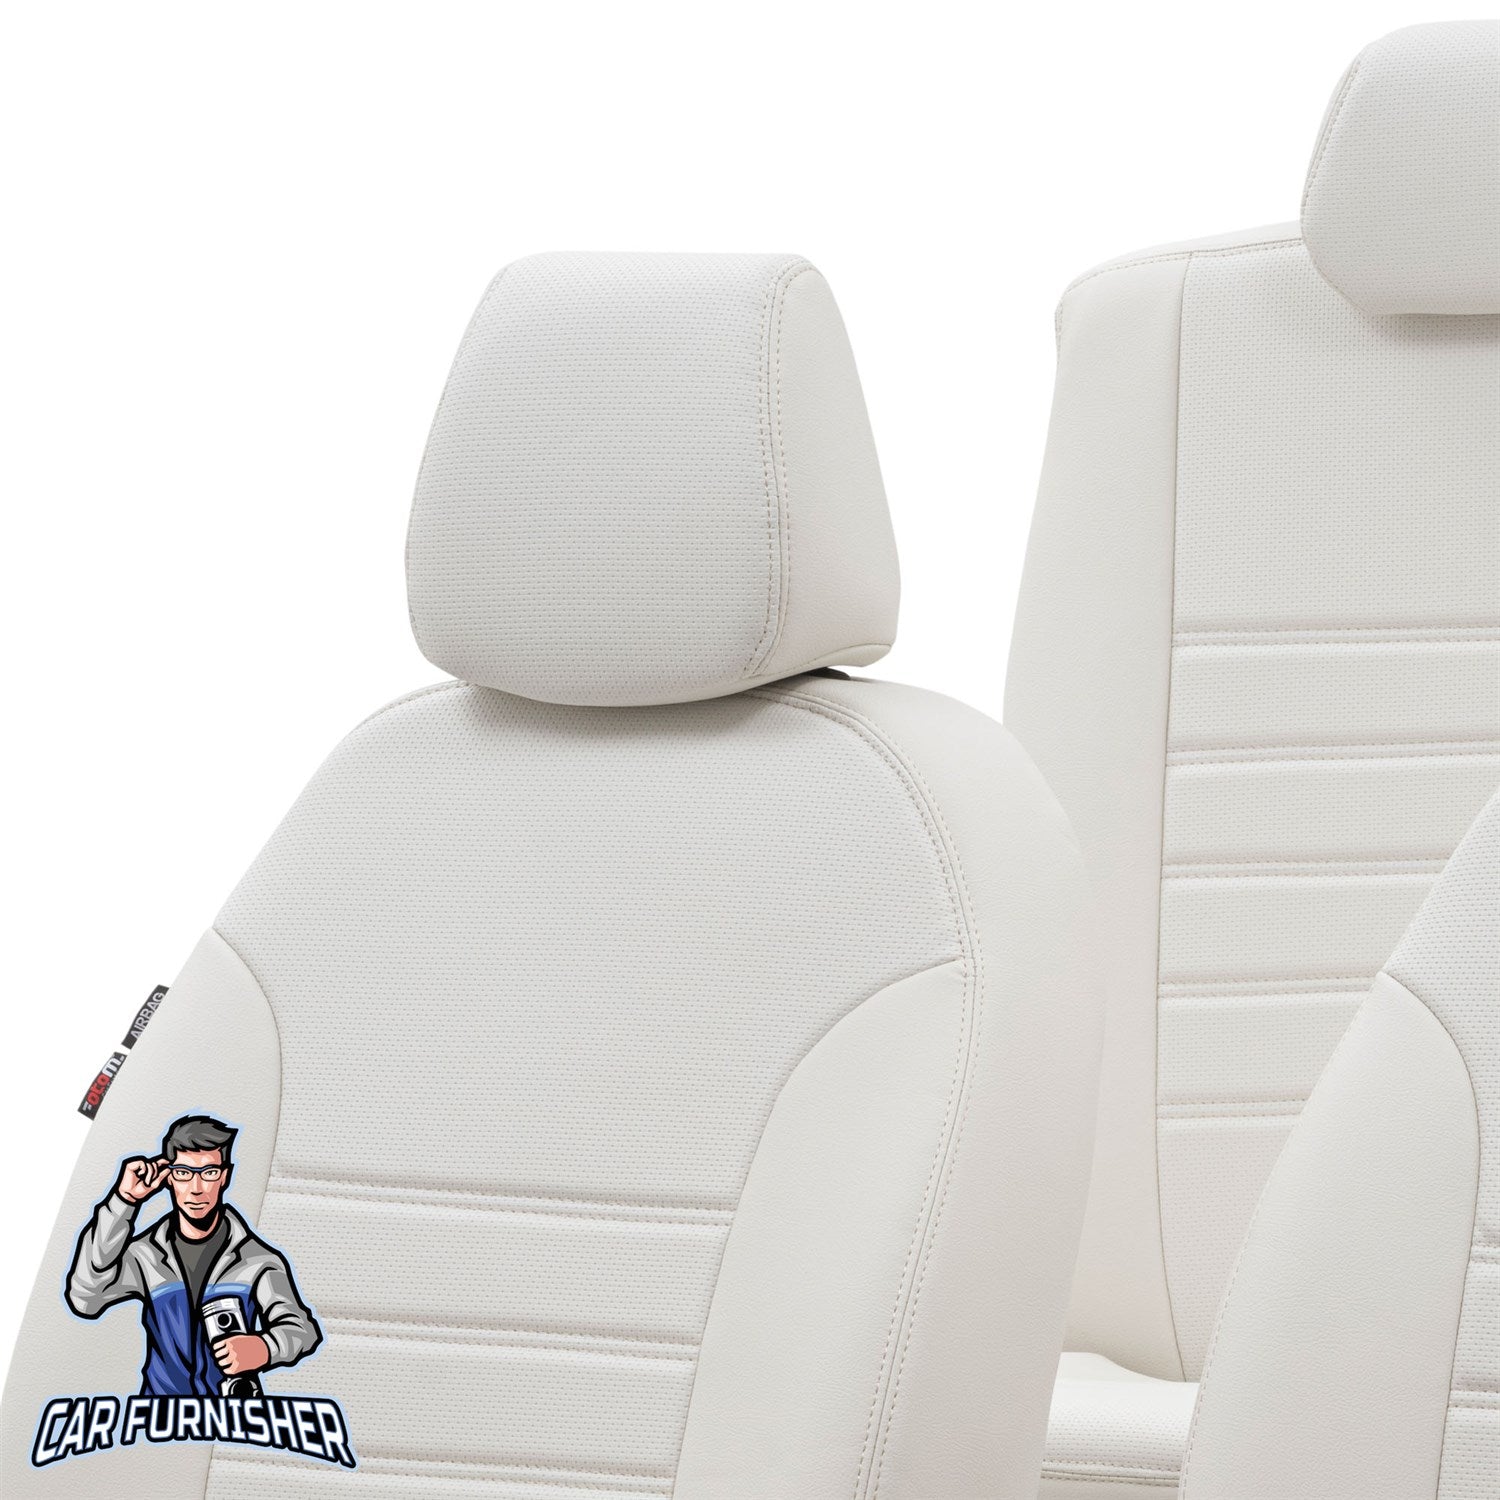 Fiat Brava Seat Covers New York Leather Design Ivory Leather